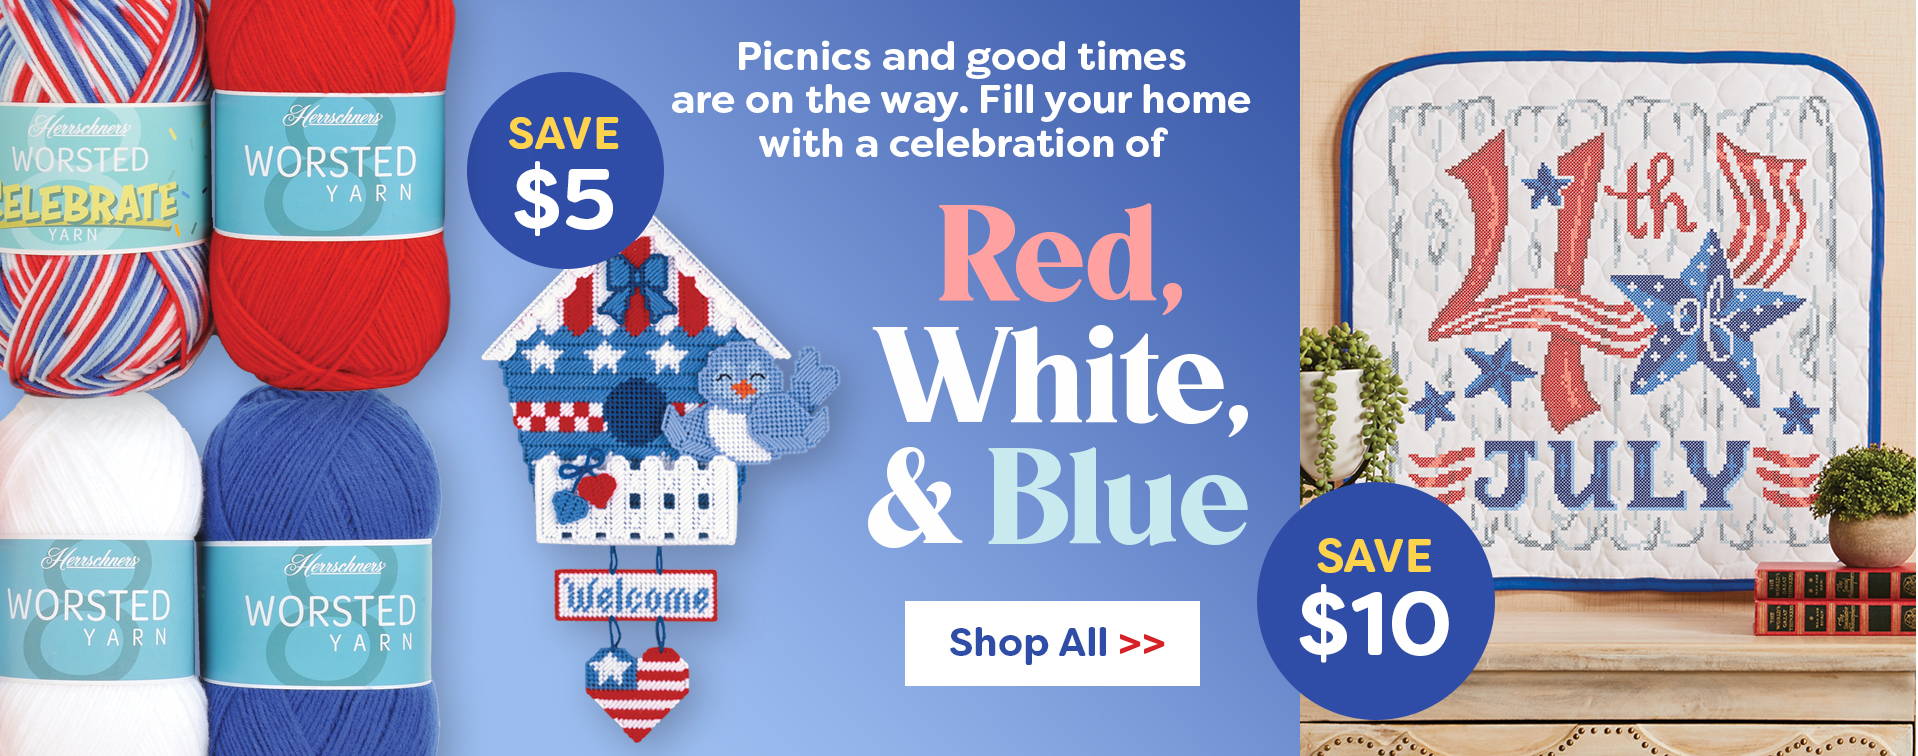 Save up to $10 - Red, White, and Blue. Image: Red, White, and Blue featured projects.